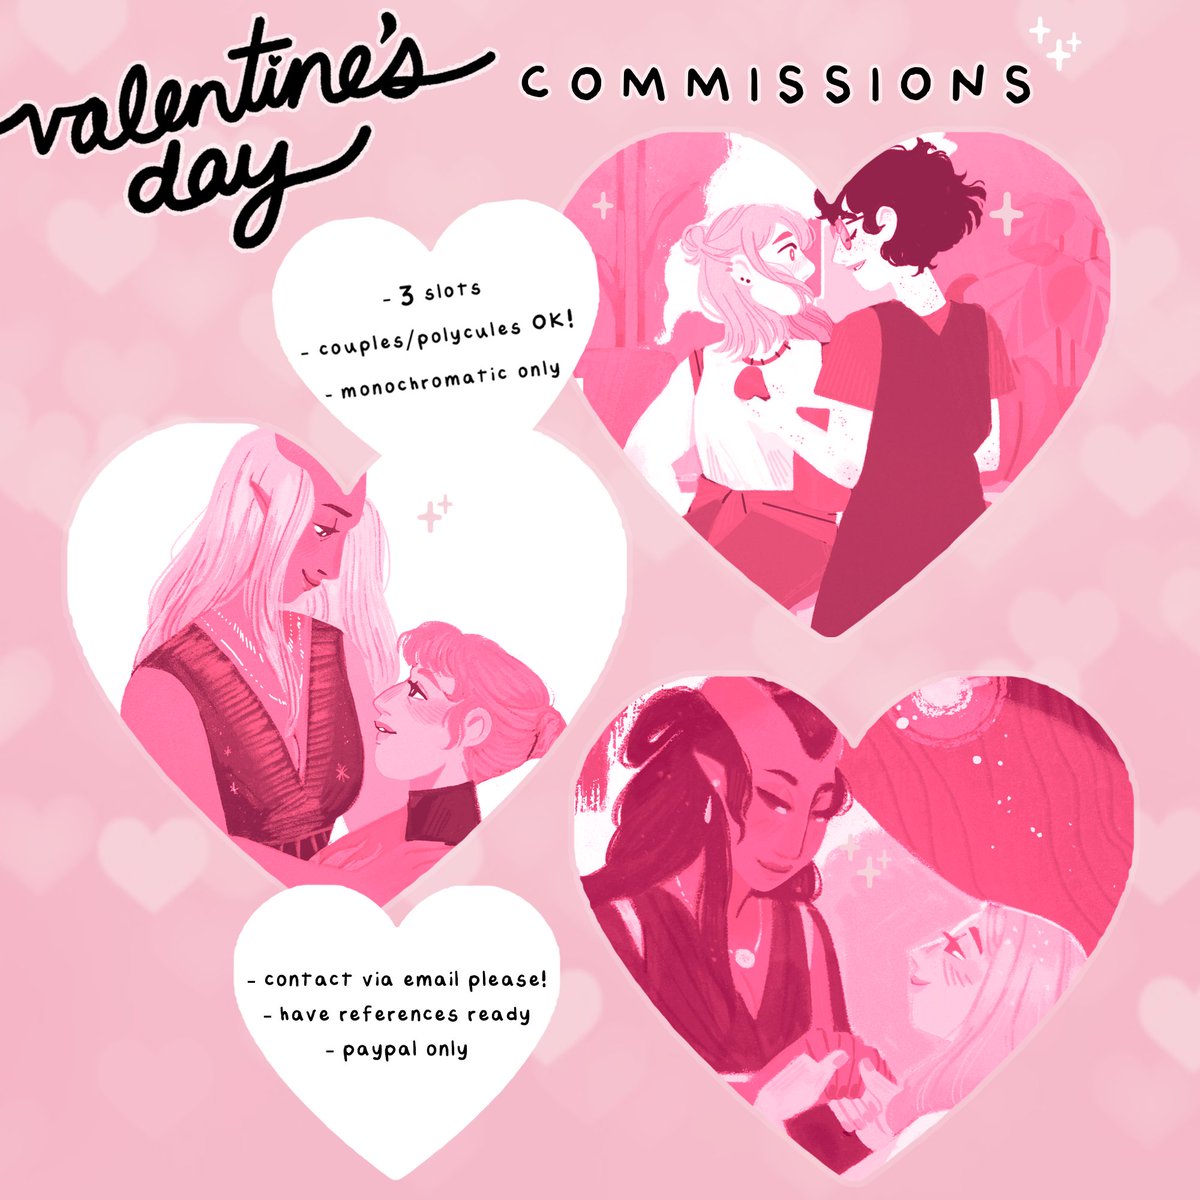 ?VALENTINE'S DAY COMMISSIONS?
opening slots a little ahead of time for valentine's day! details in the image (price is quoted per comm), link to contact form in replies! (1/2) 